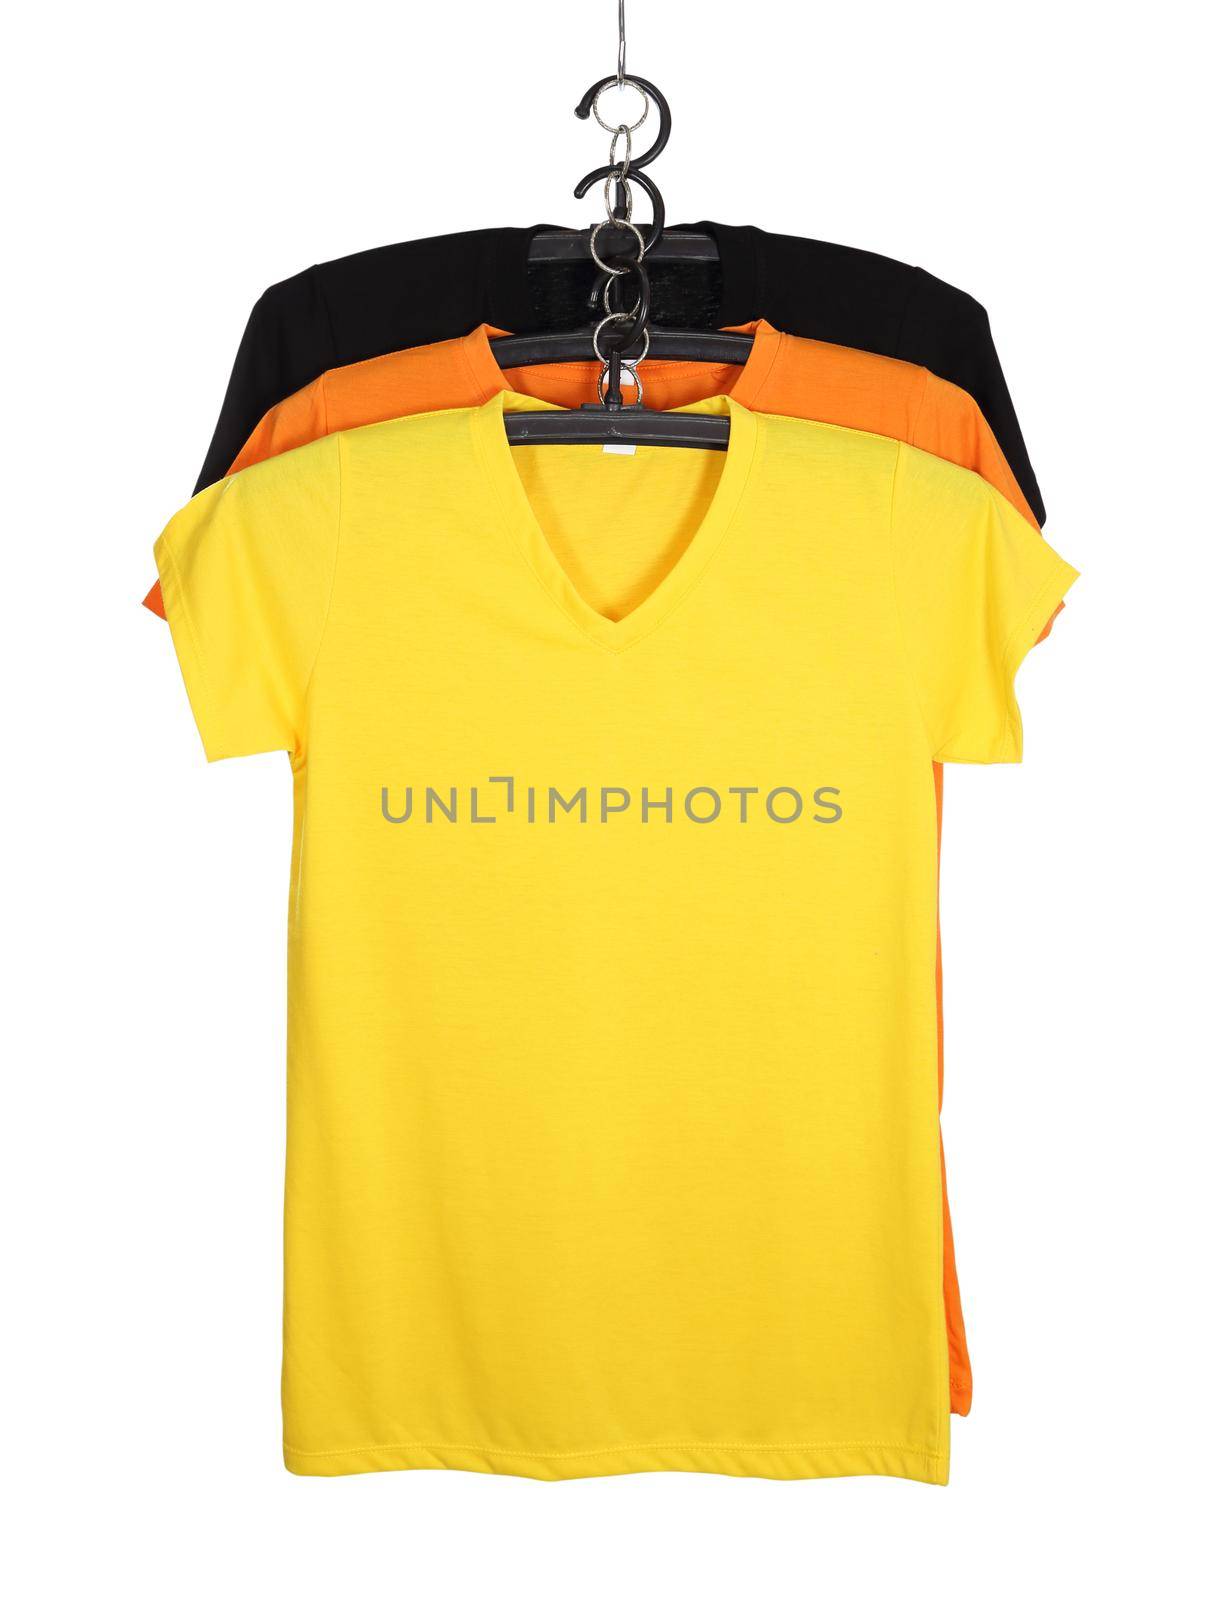 three t-shirt template on hange isolated on white background (with clipping path)